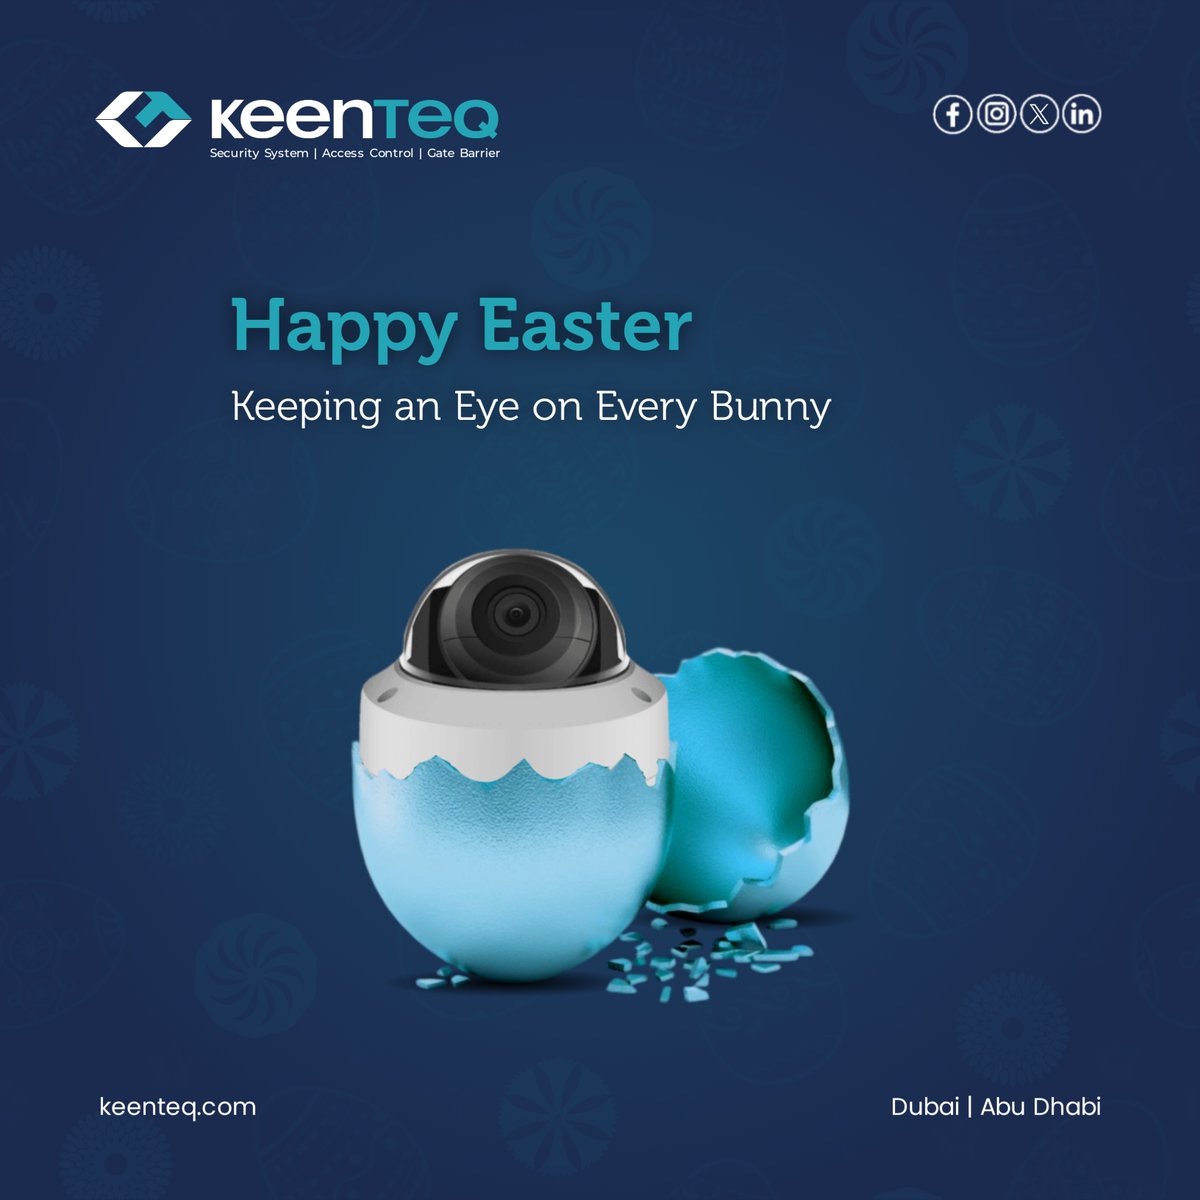 Happy Easter!
May the miracle of Easter fill your heart with hope and peace.

#easter #happyeaster #easter2024 #easterbunny #eastereggs #dubai #uae #keenteq